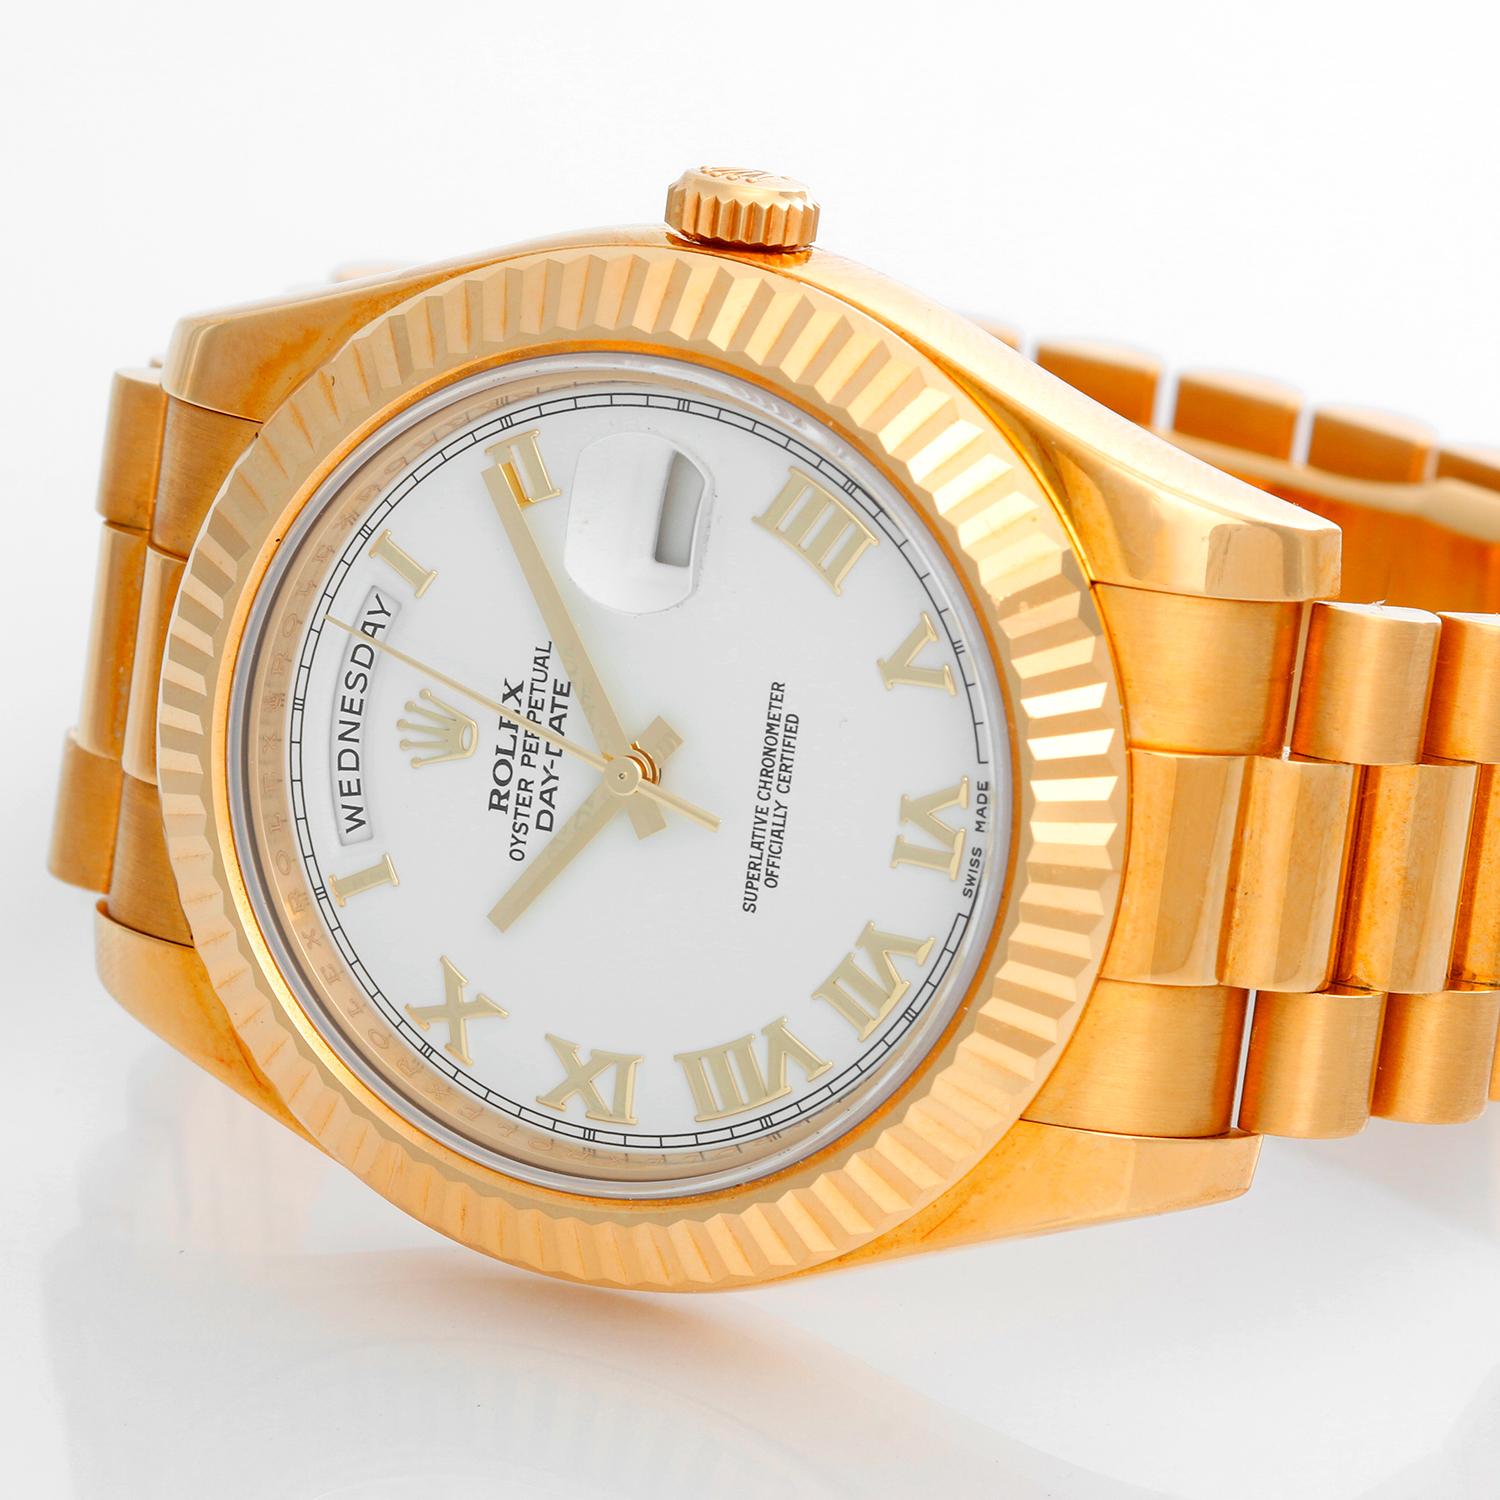 Rolex Day-Date II 41mm 18k Yellow Gold Men's President Watch 218238 - Automatic winding, 31 jewels, sapphire crystal, with day and date. 18k yellow gold case with fluted bezel (41mm diameter). White dial with raised roman numerals . 18k yellow gold